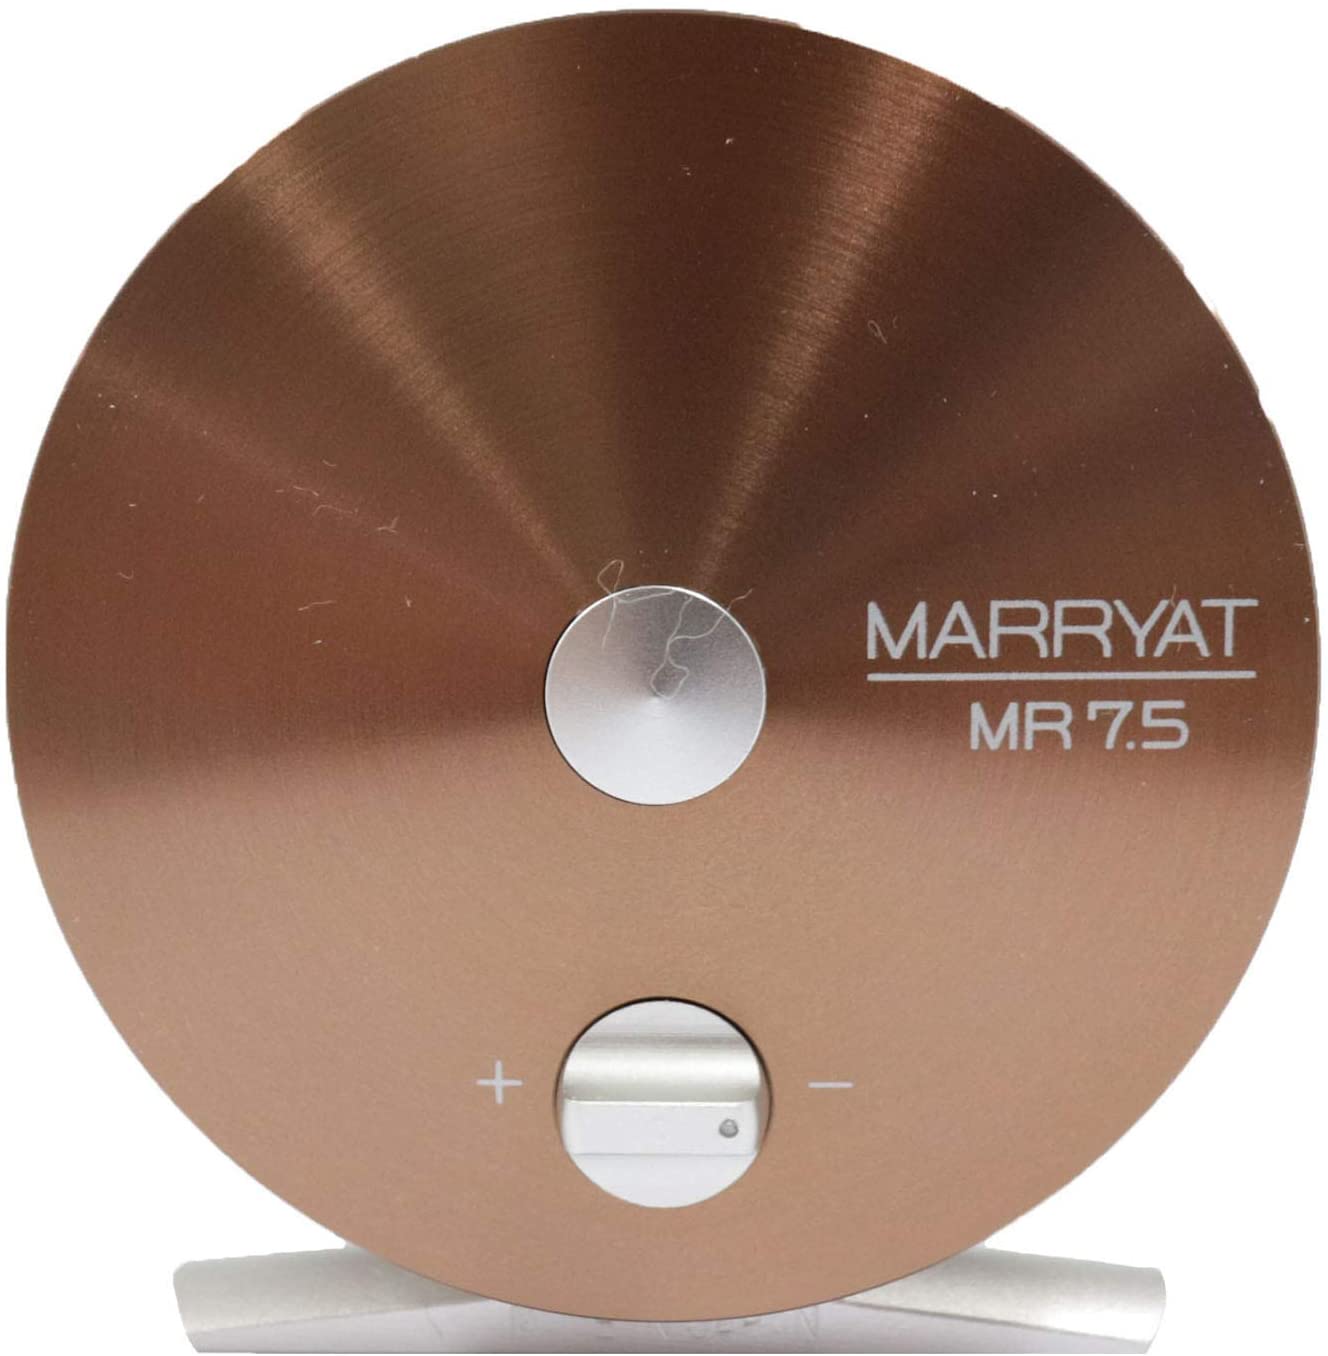 Marryat MR 8.5 alloy trout fly reel, made in Japan black finish +